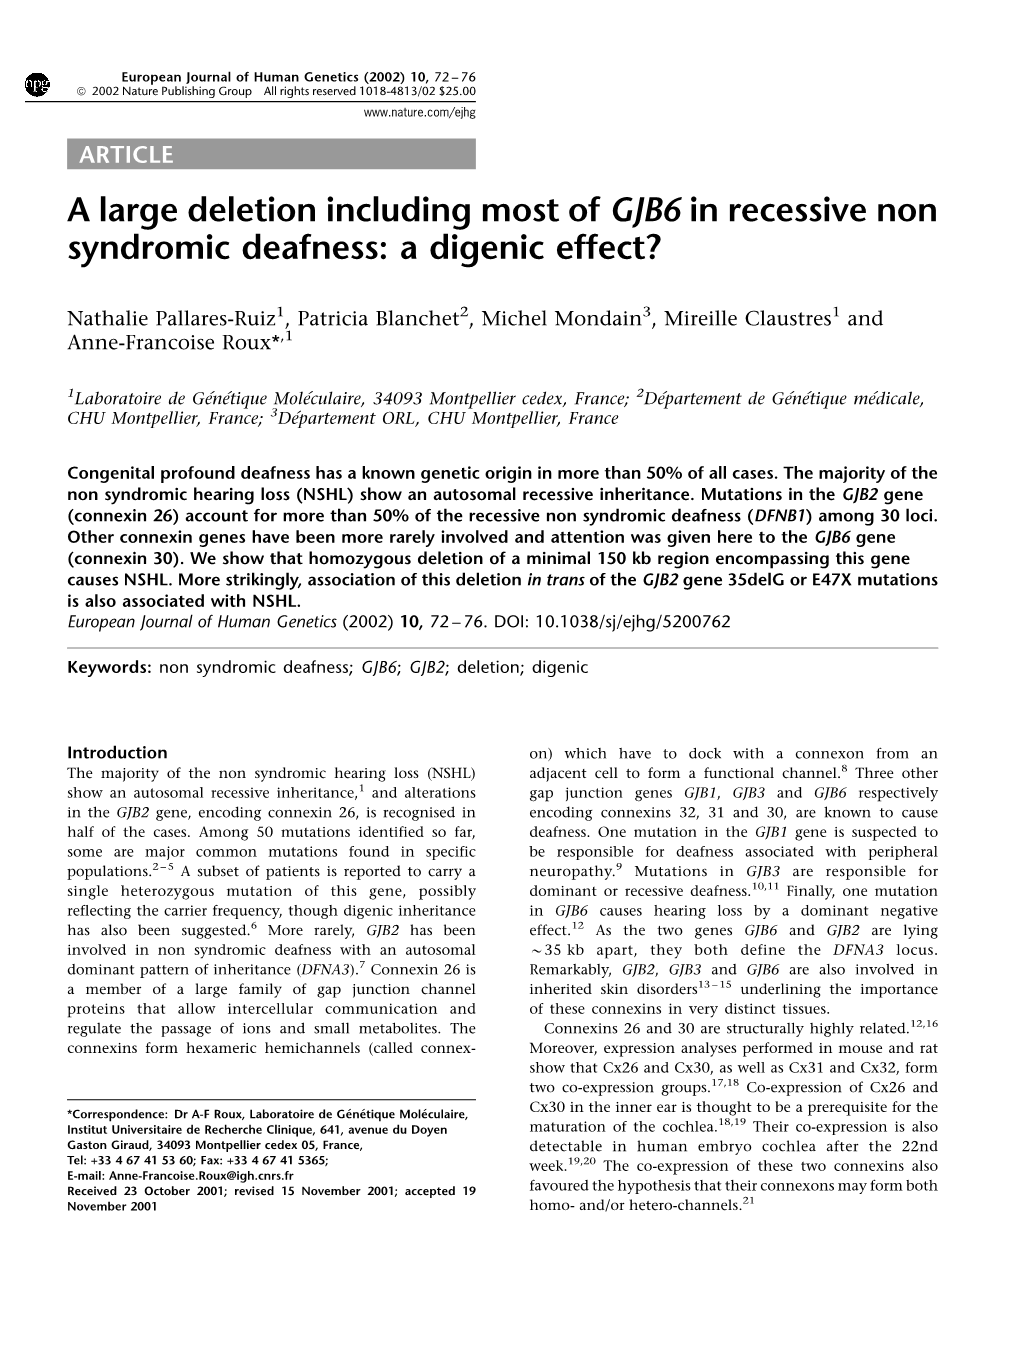 A Large Deletion Including Most of GJB6 in Recessive Non Syndromic Deafness: a Digenic Effect?